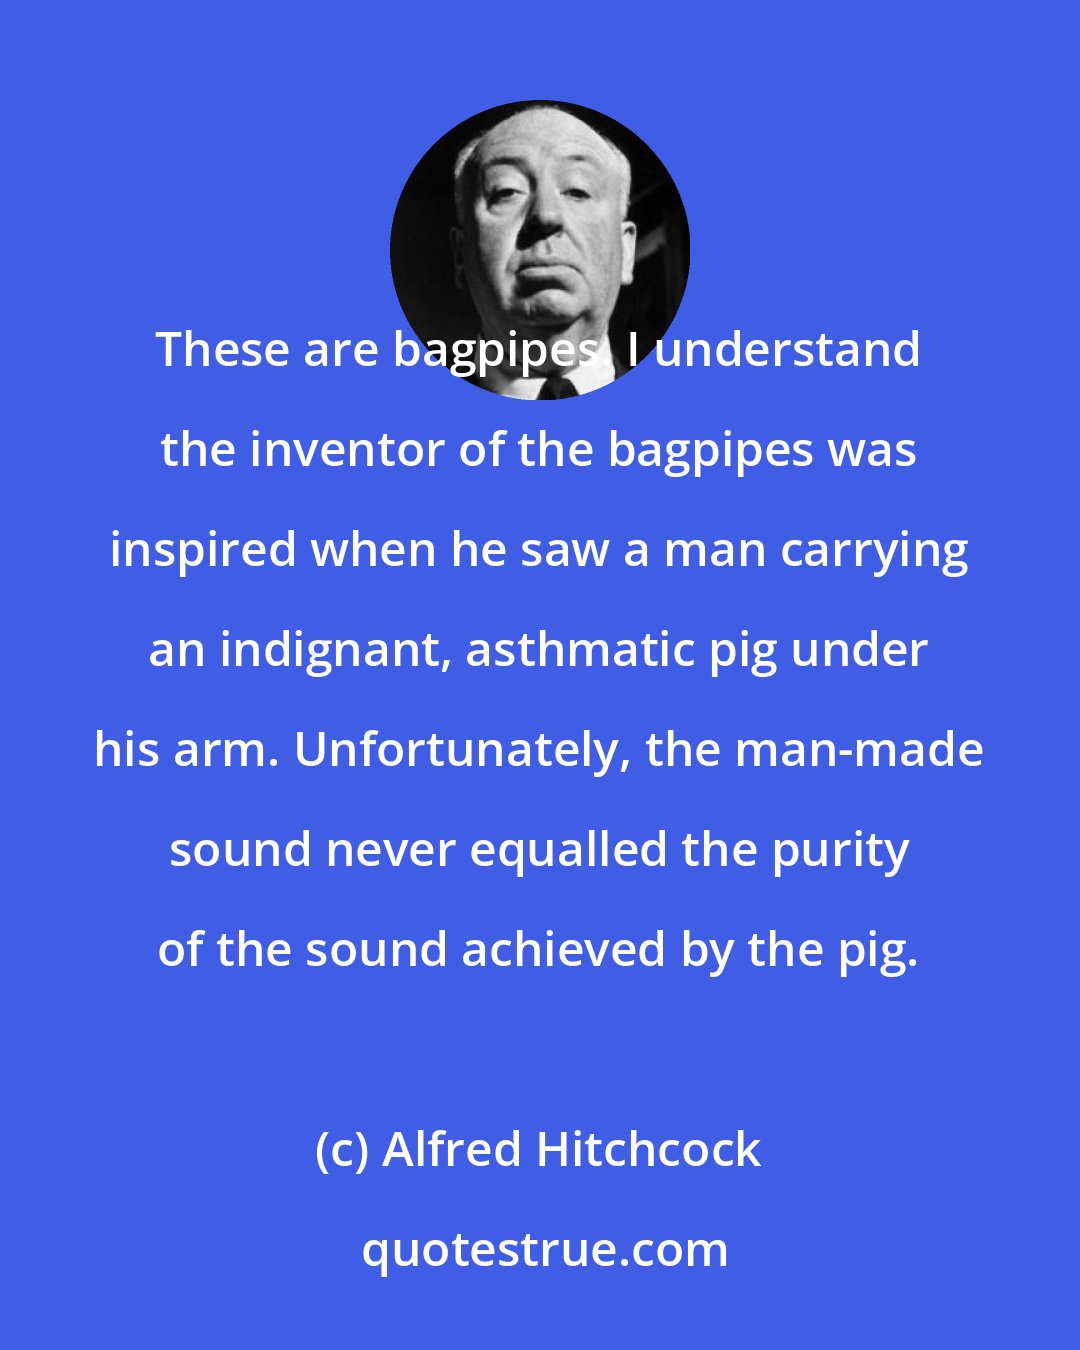 Alfred Hitchcock: These are bagpipes. I understand the inventor of the bagpipes was inspired when he saw a man carrying an indignant, asthmatic pig under his arm. Unfortunately, the man-made sound never equalled the purity of the sound achieved by the pig.